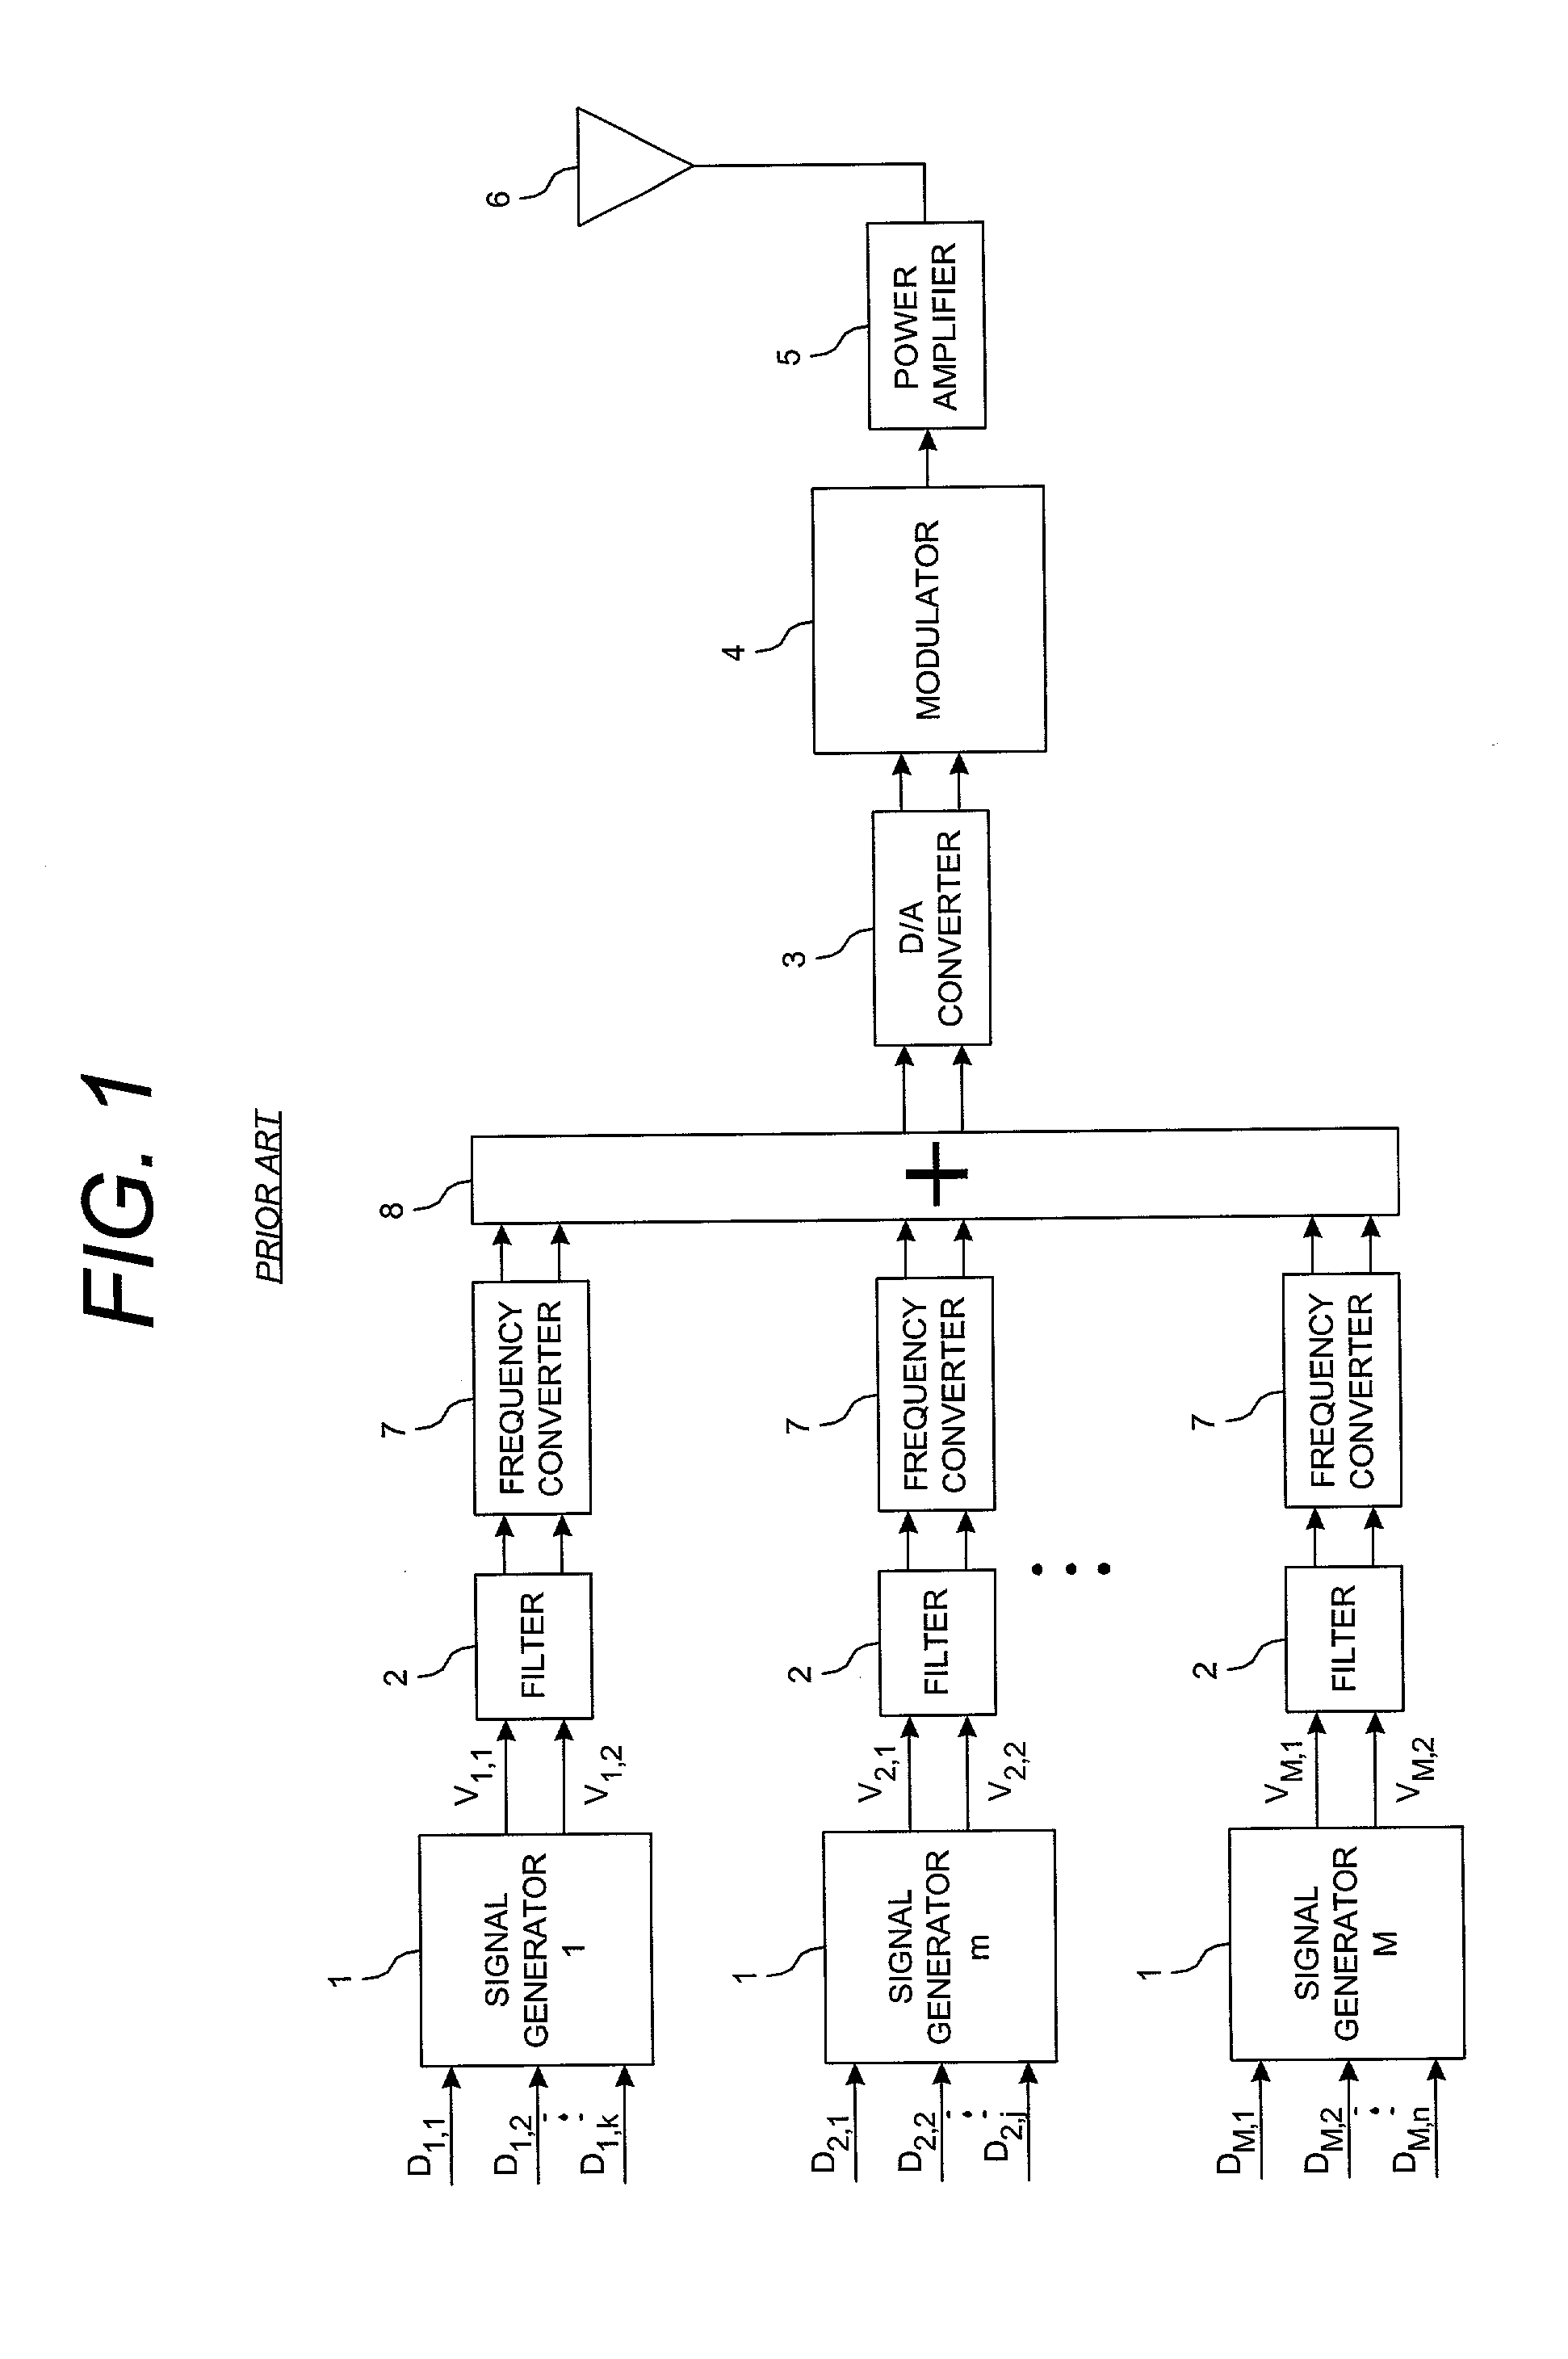 System and method for post filtering peak power reduction in multi-carrier communications systems